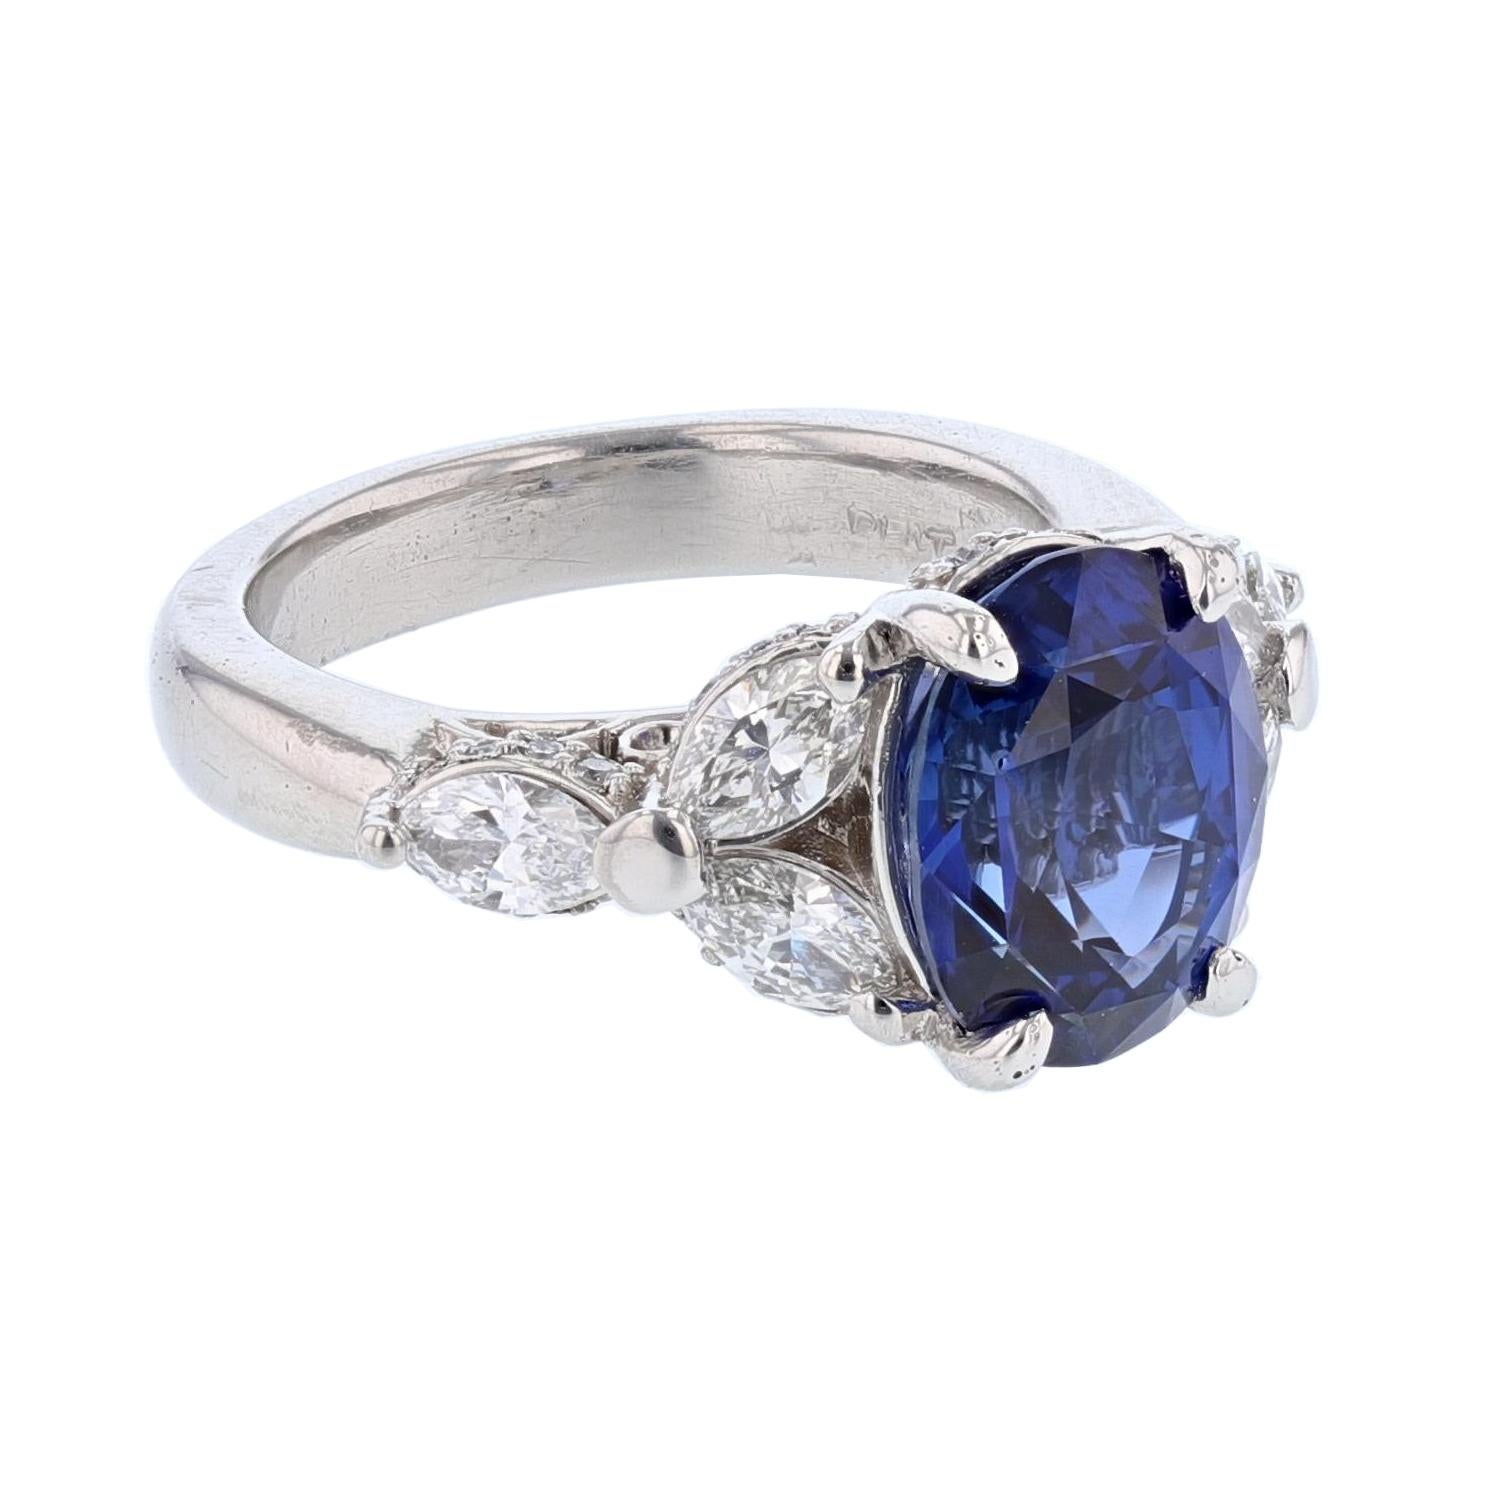 This ring is made in Platinum and features one GRS certified Oval Cut, Natural Blue Sapphire weighing 5.01ct, prong set, originating from Sri Lanka. The GRS report number is GRS2014-077118. The ring also has a features 6 Marquise cut diamonds